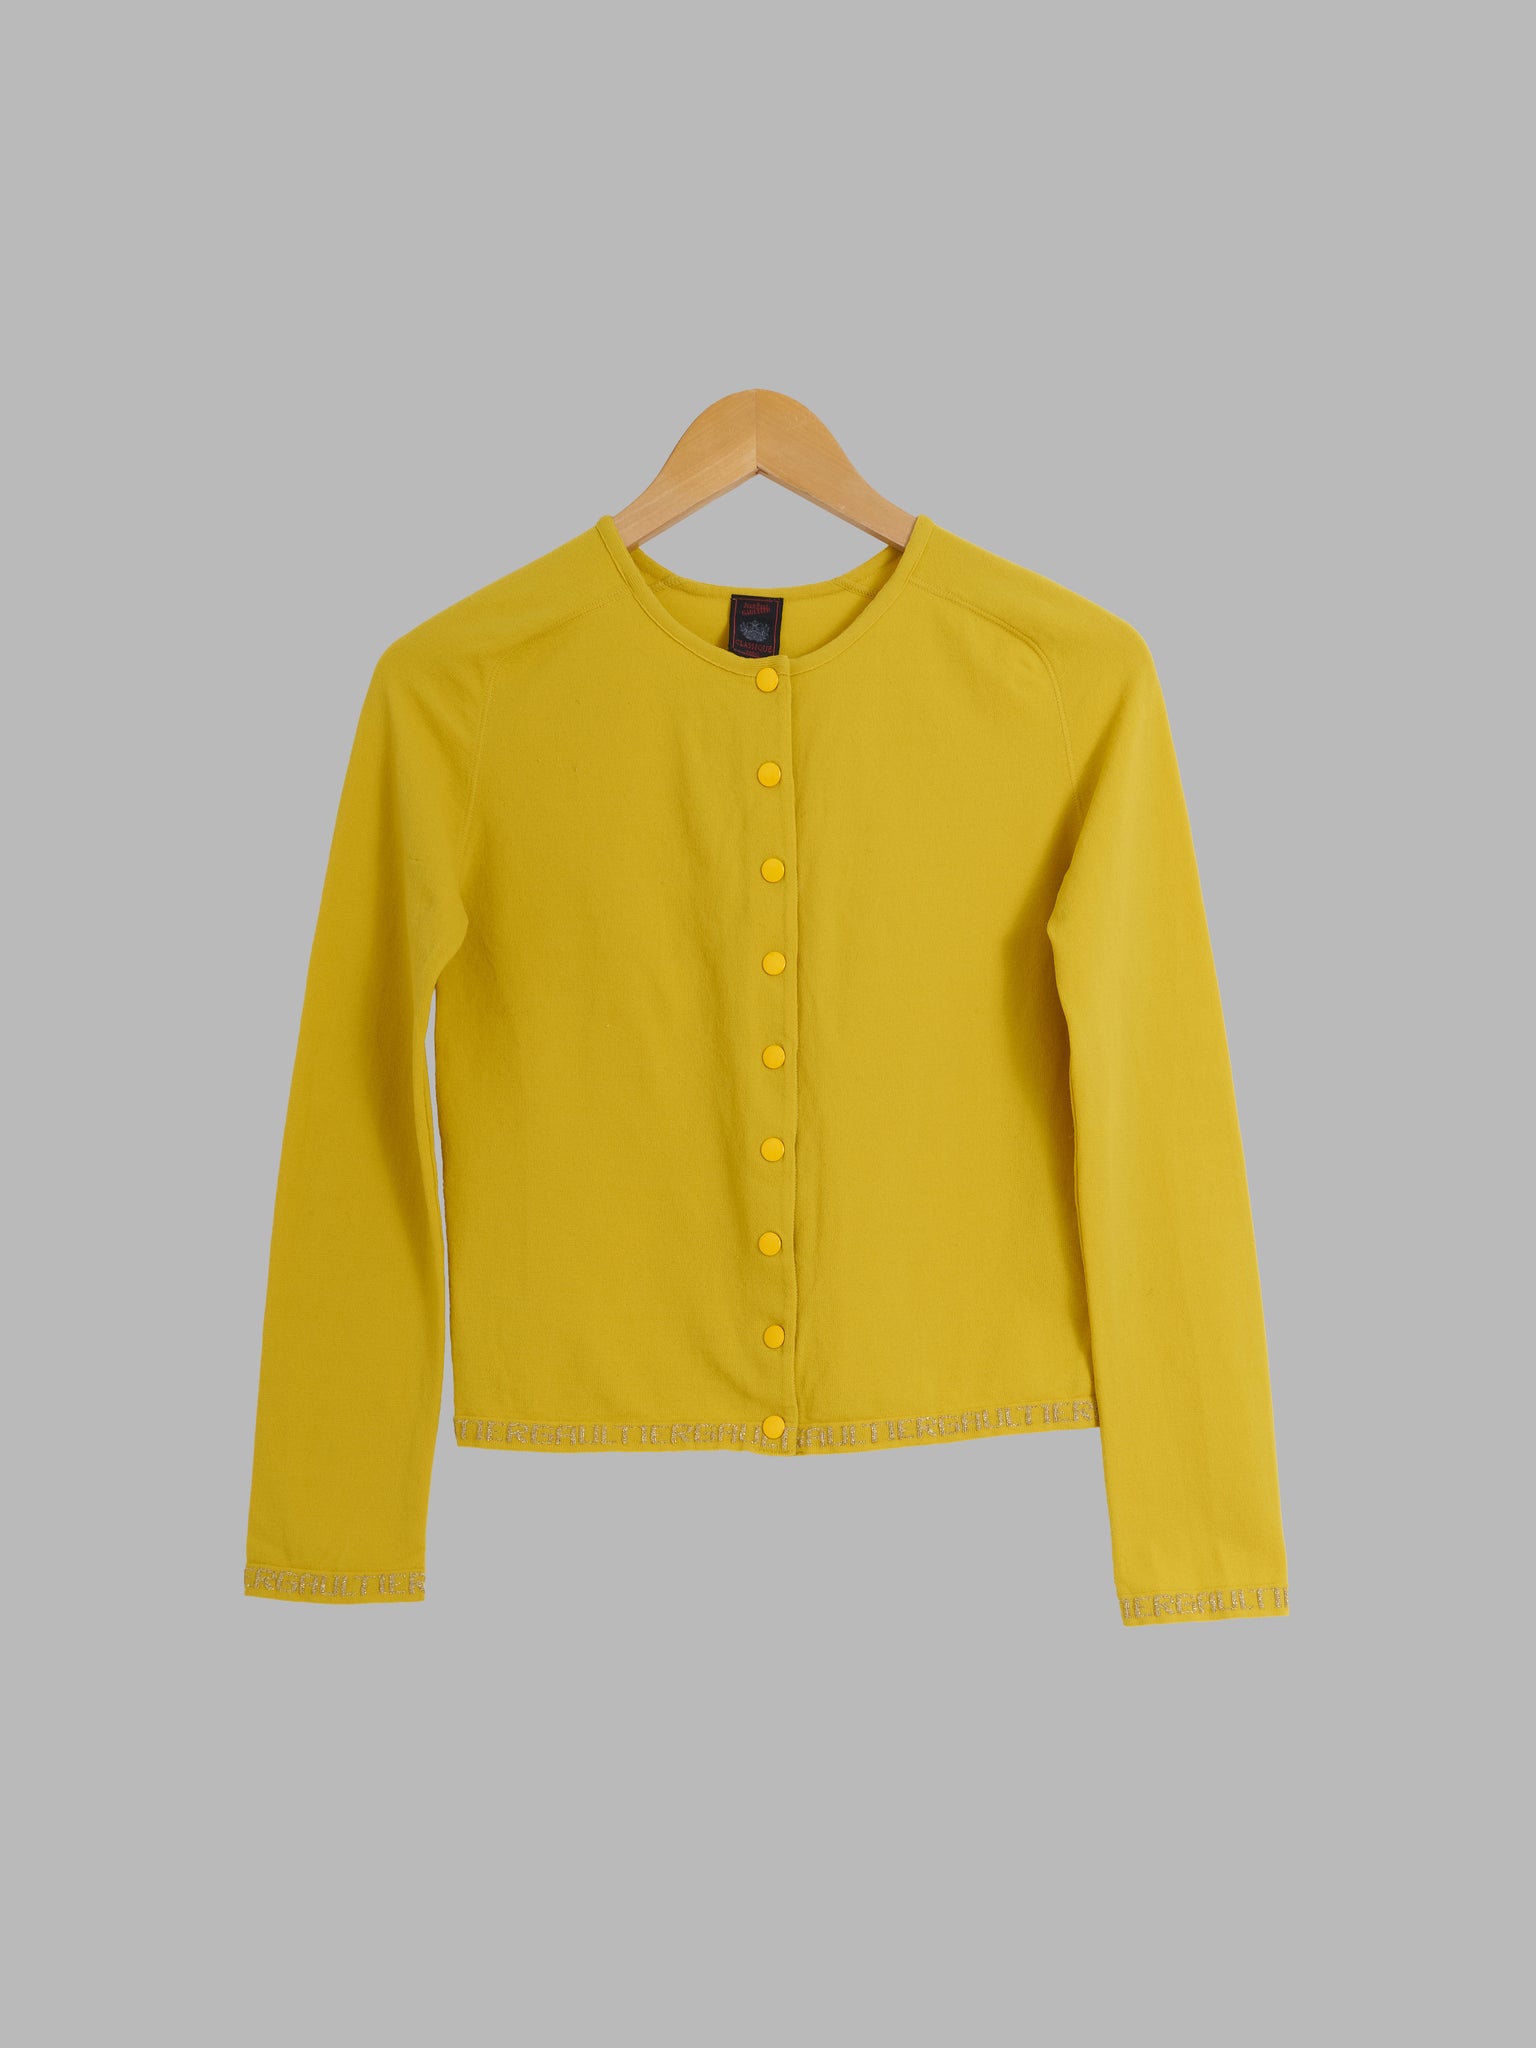 Jean Paul Gaultier mustard snap button cardigan with embroidered hem - size 40